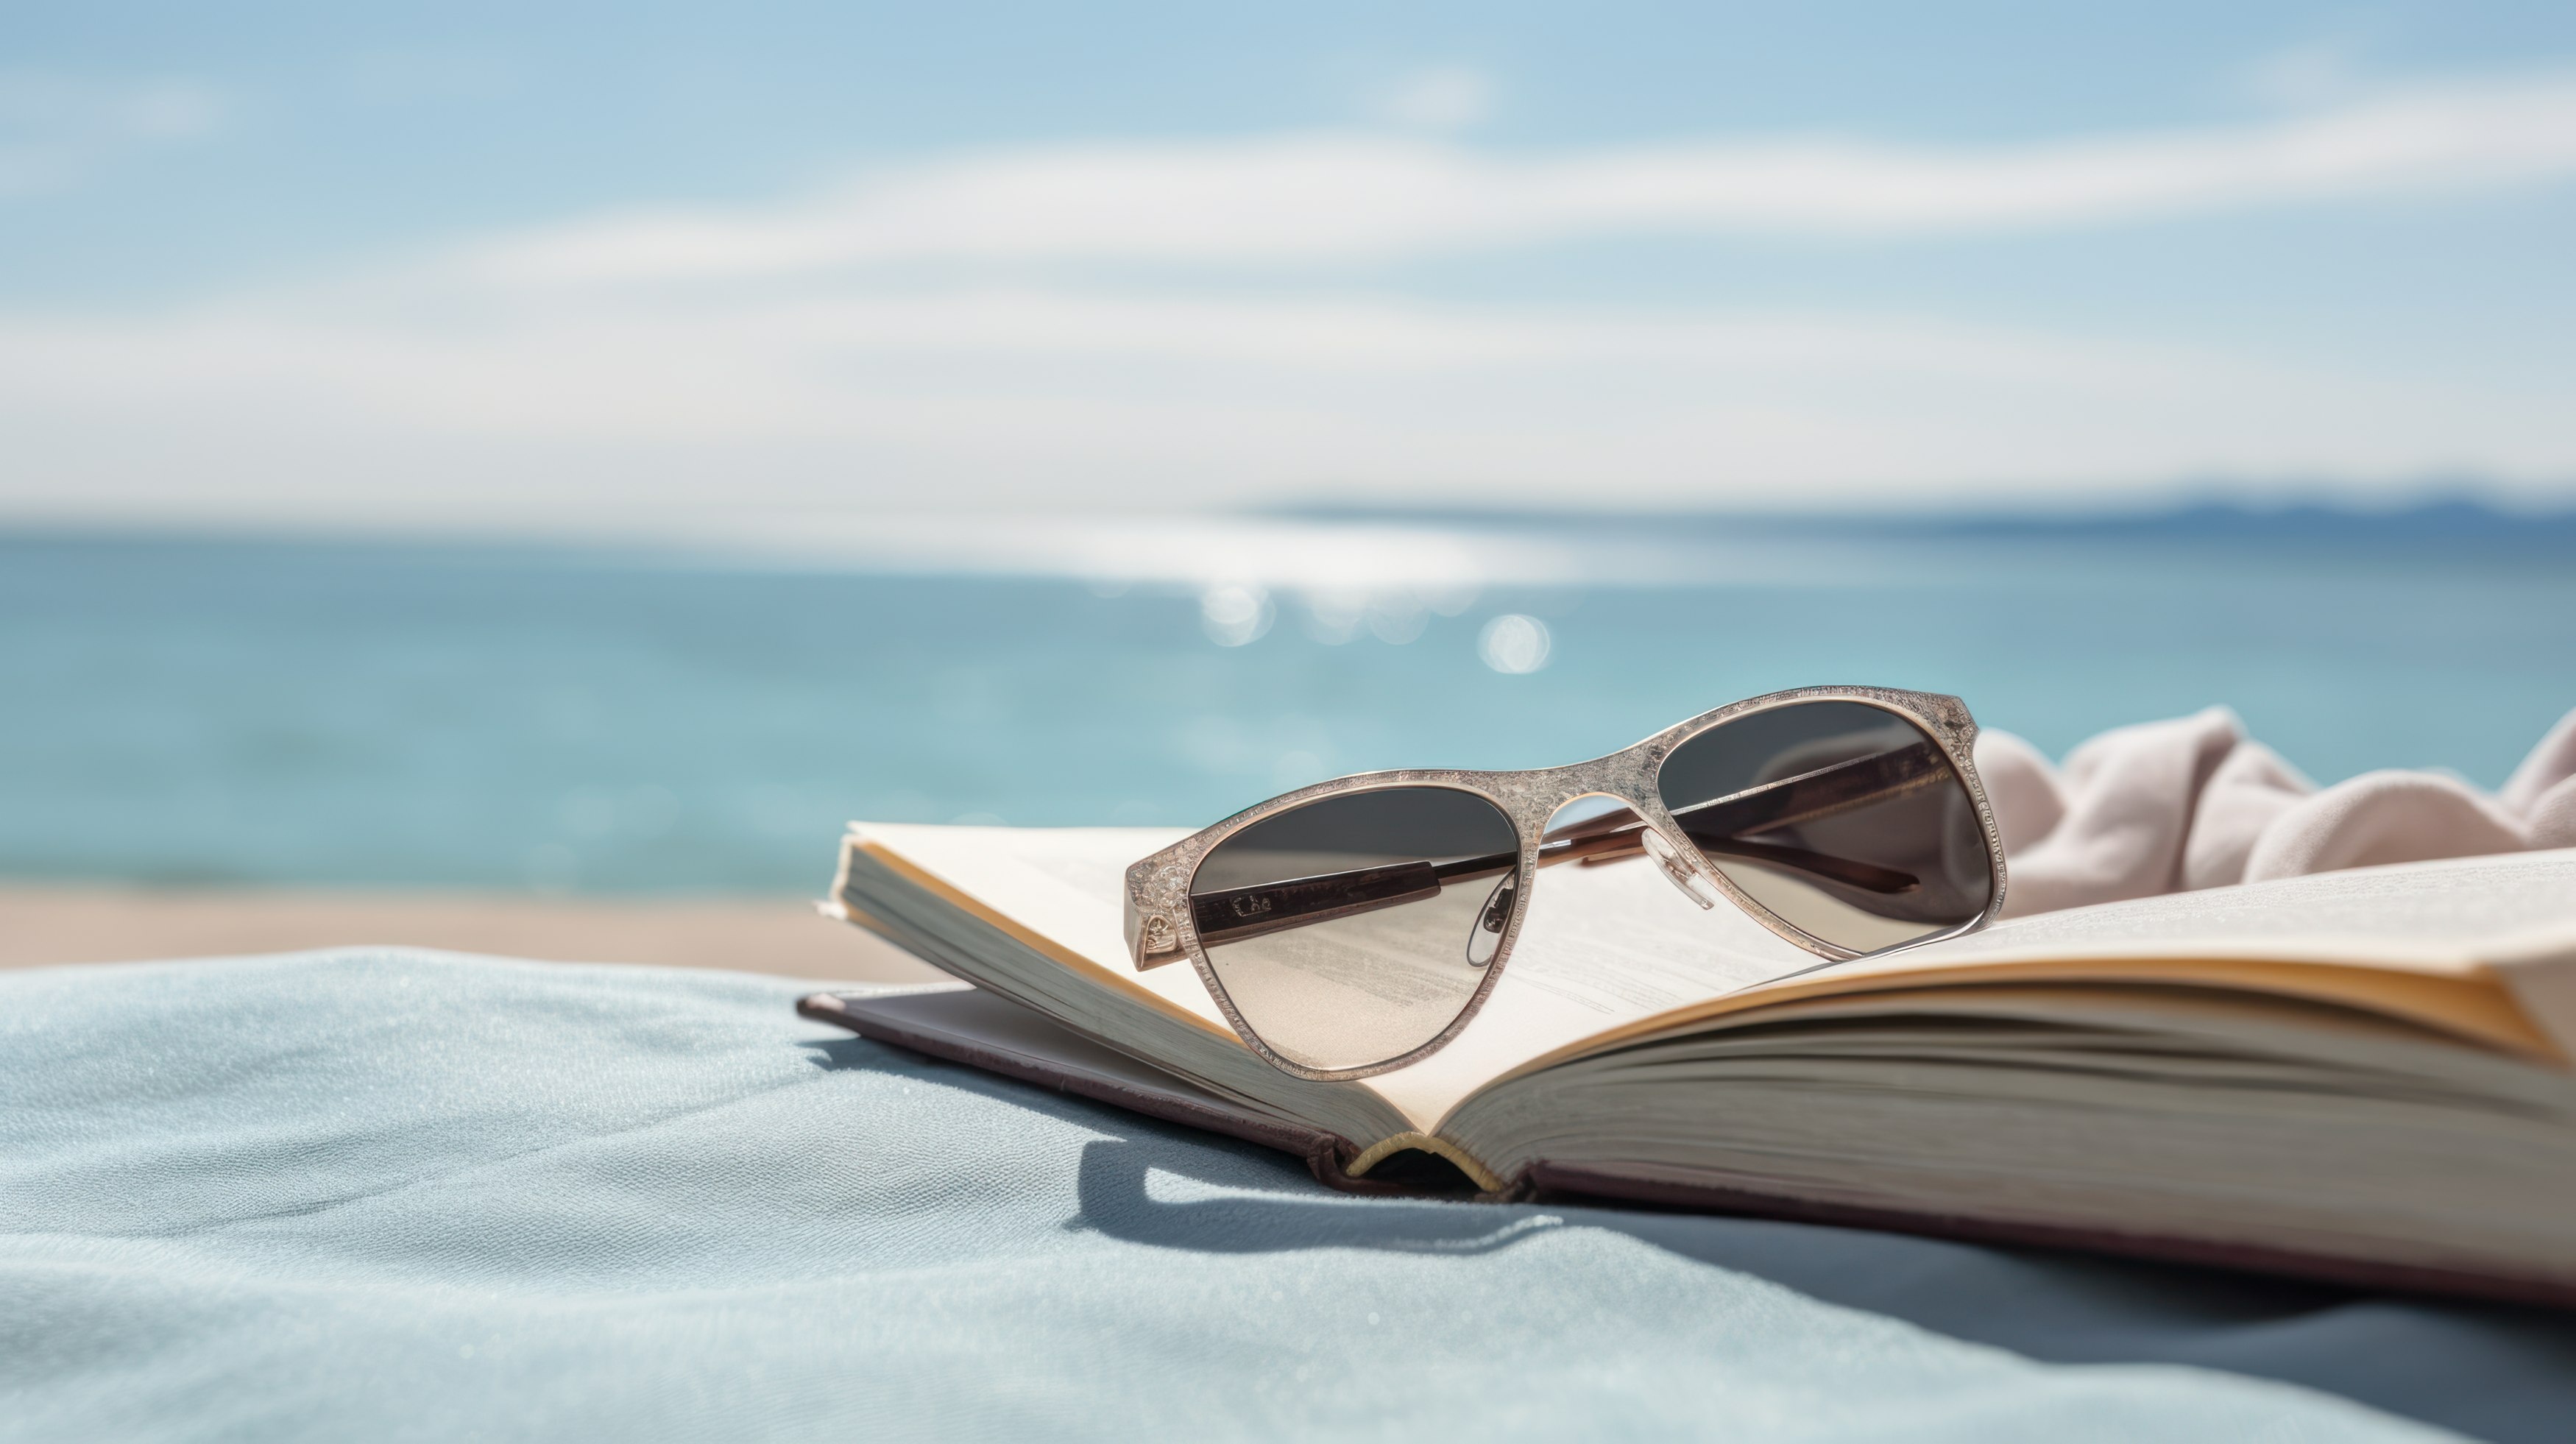 Book lying on a towel on the beach with the sun and sea in the background